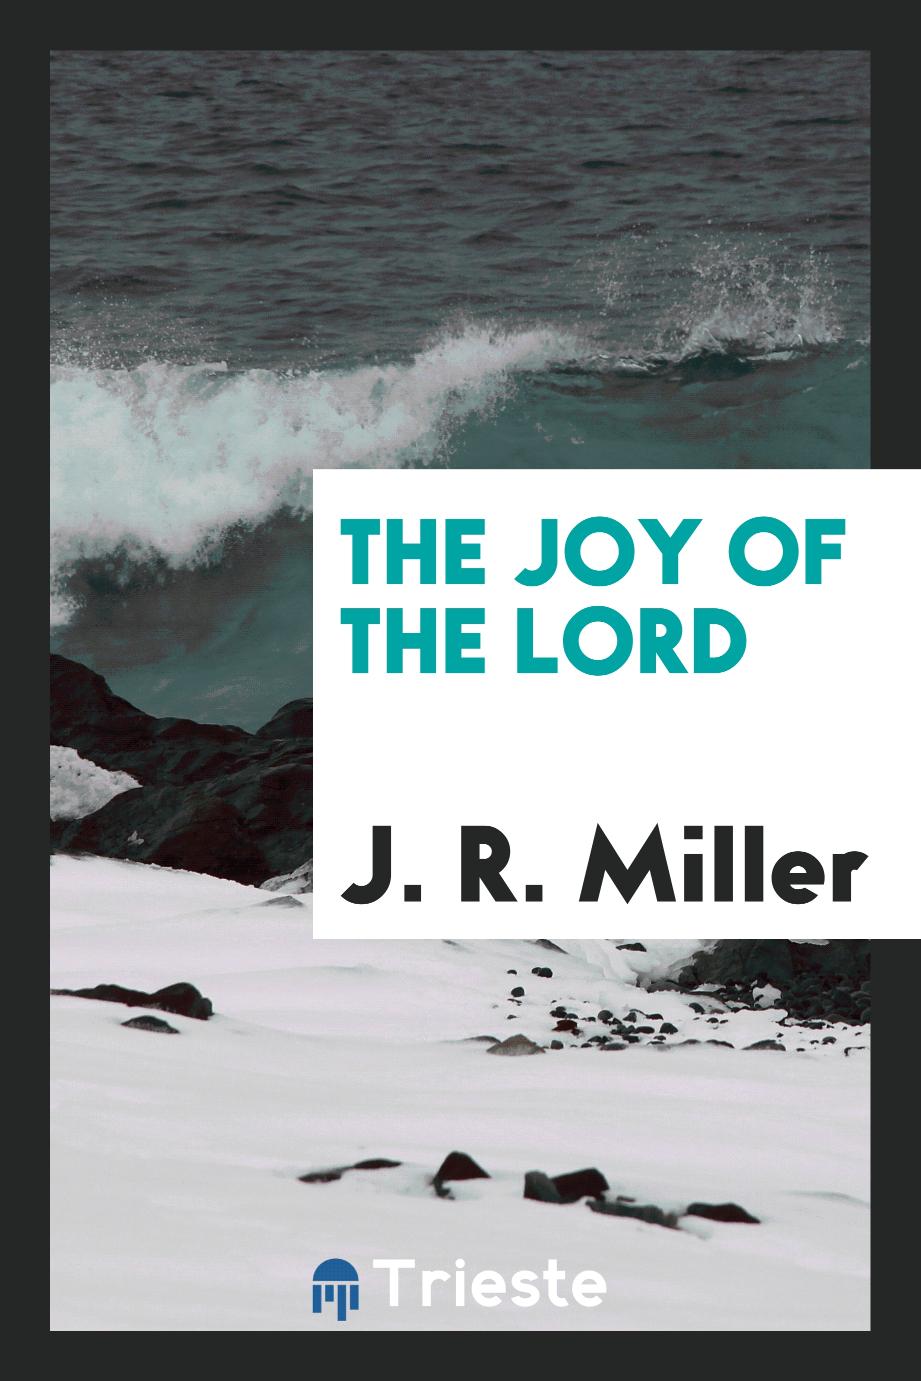 The joy of the Lord